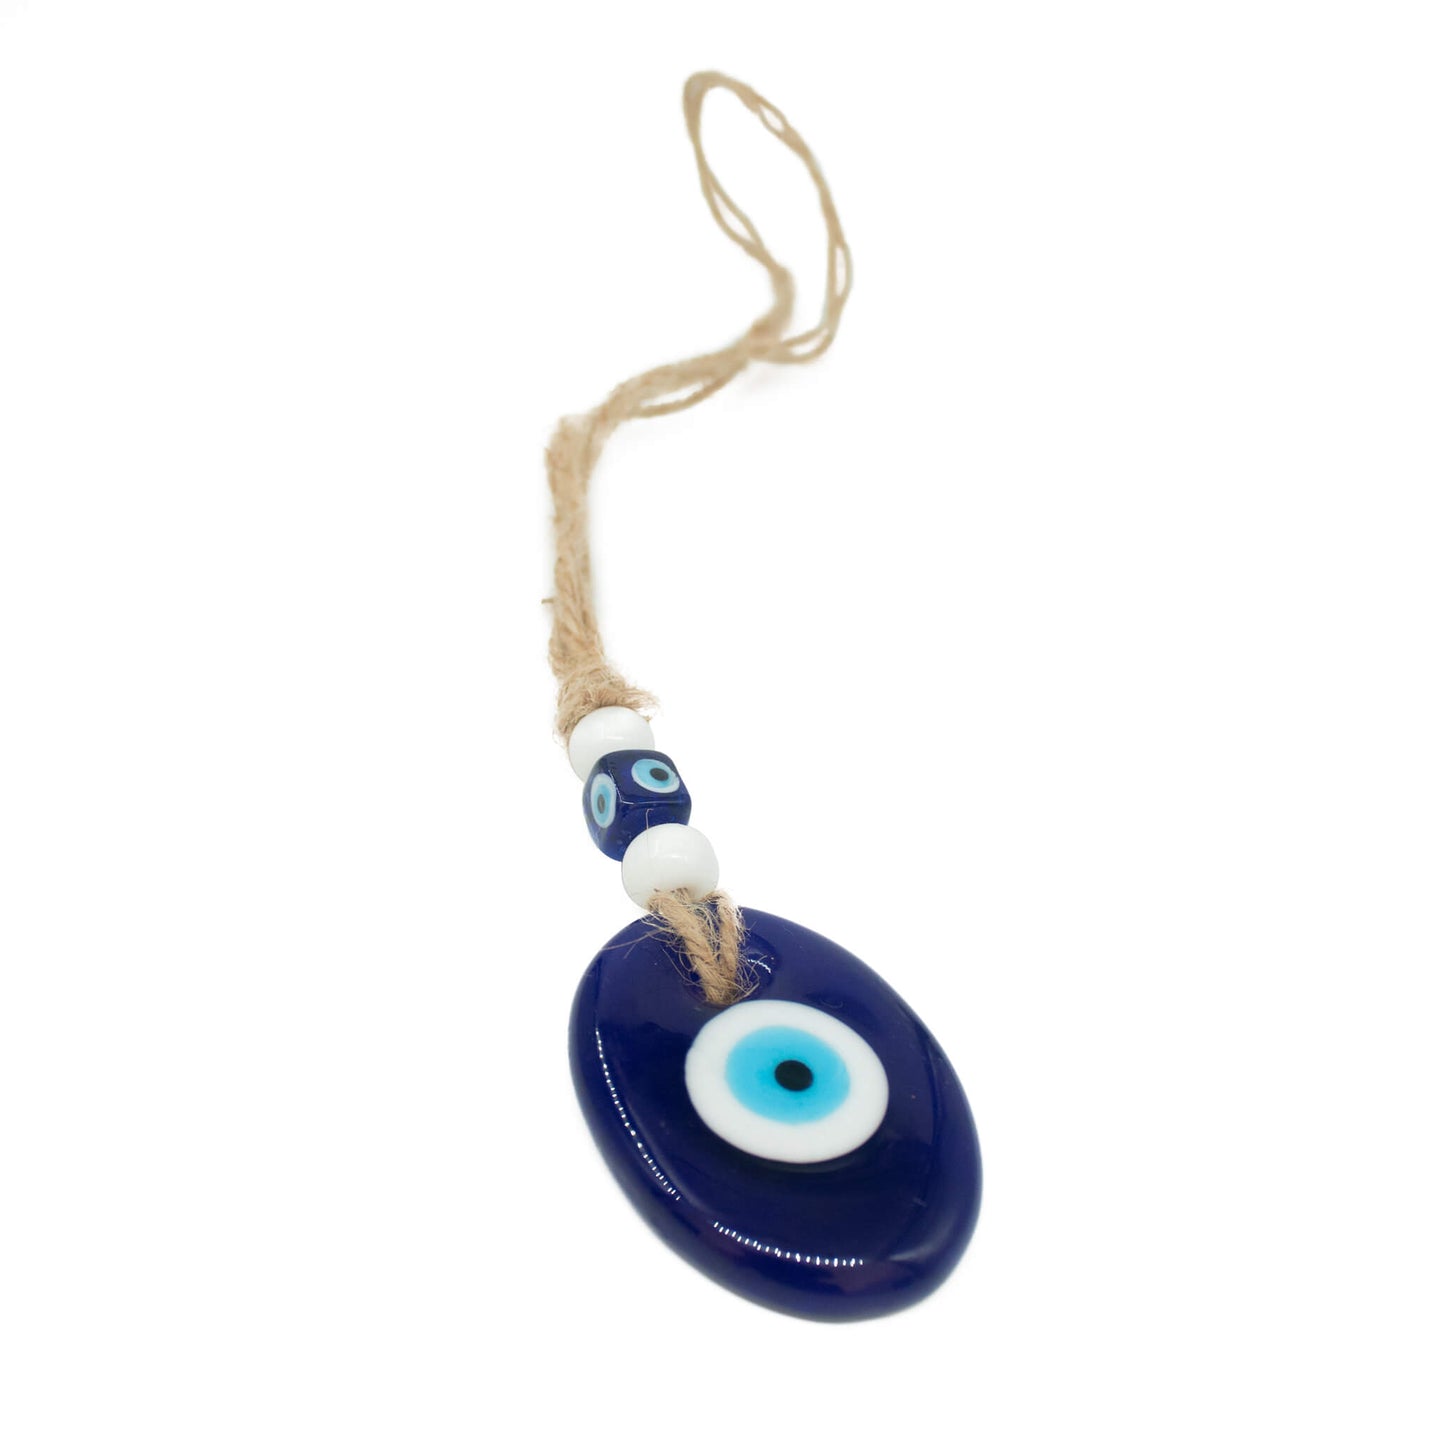 evil eye wall hanging blue and oval shape